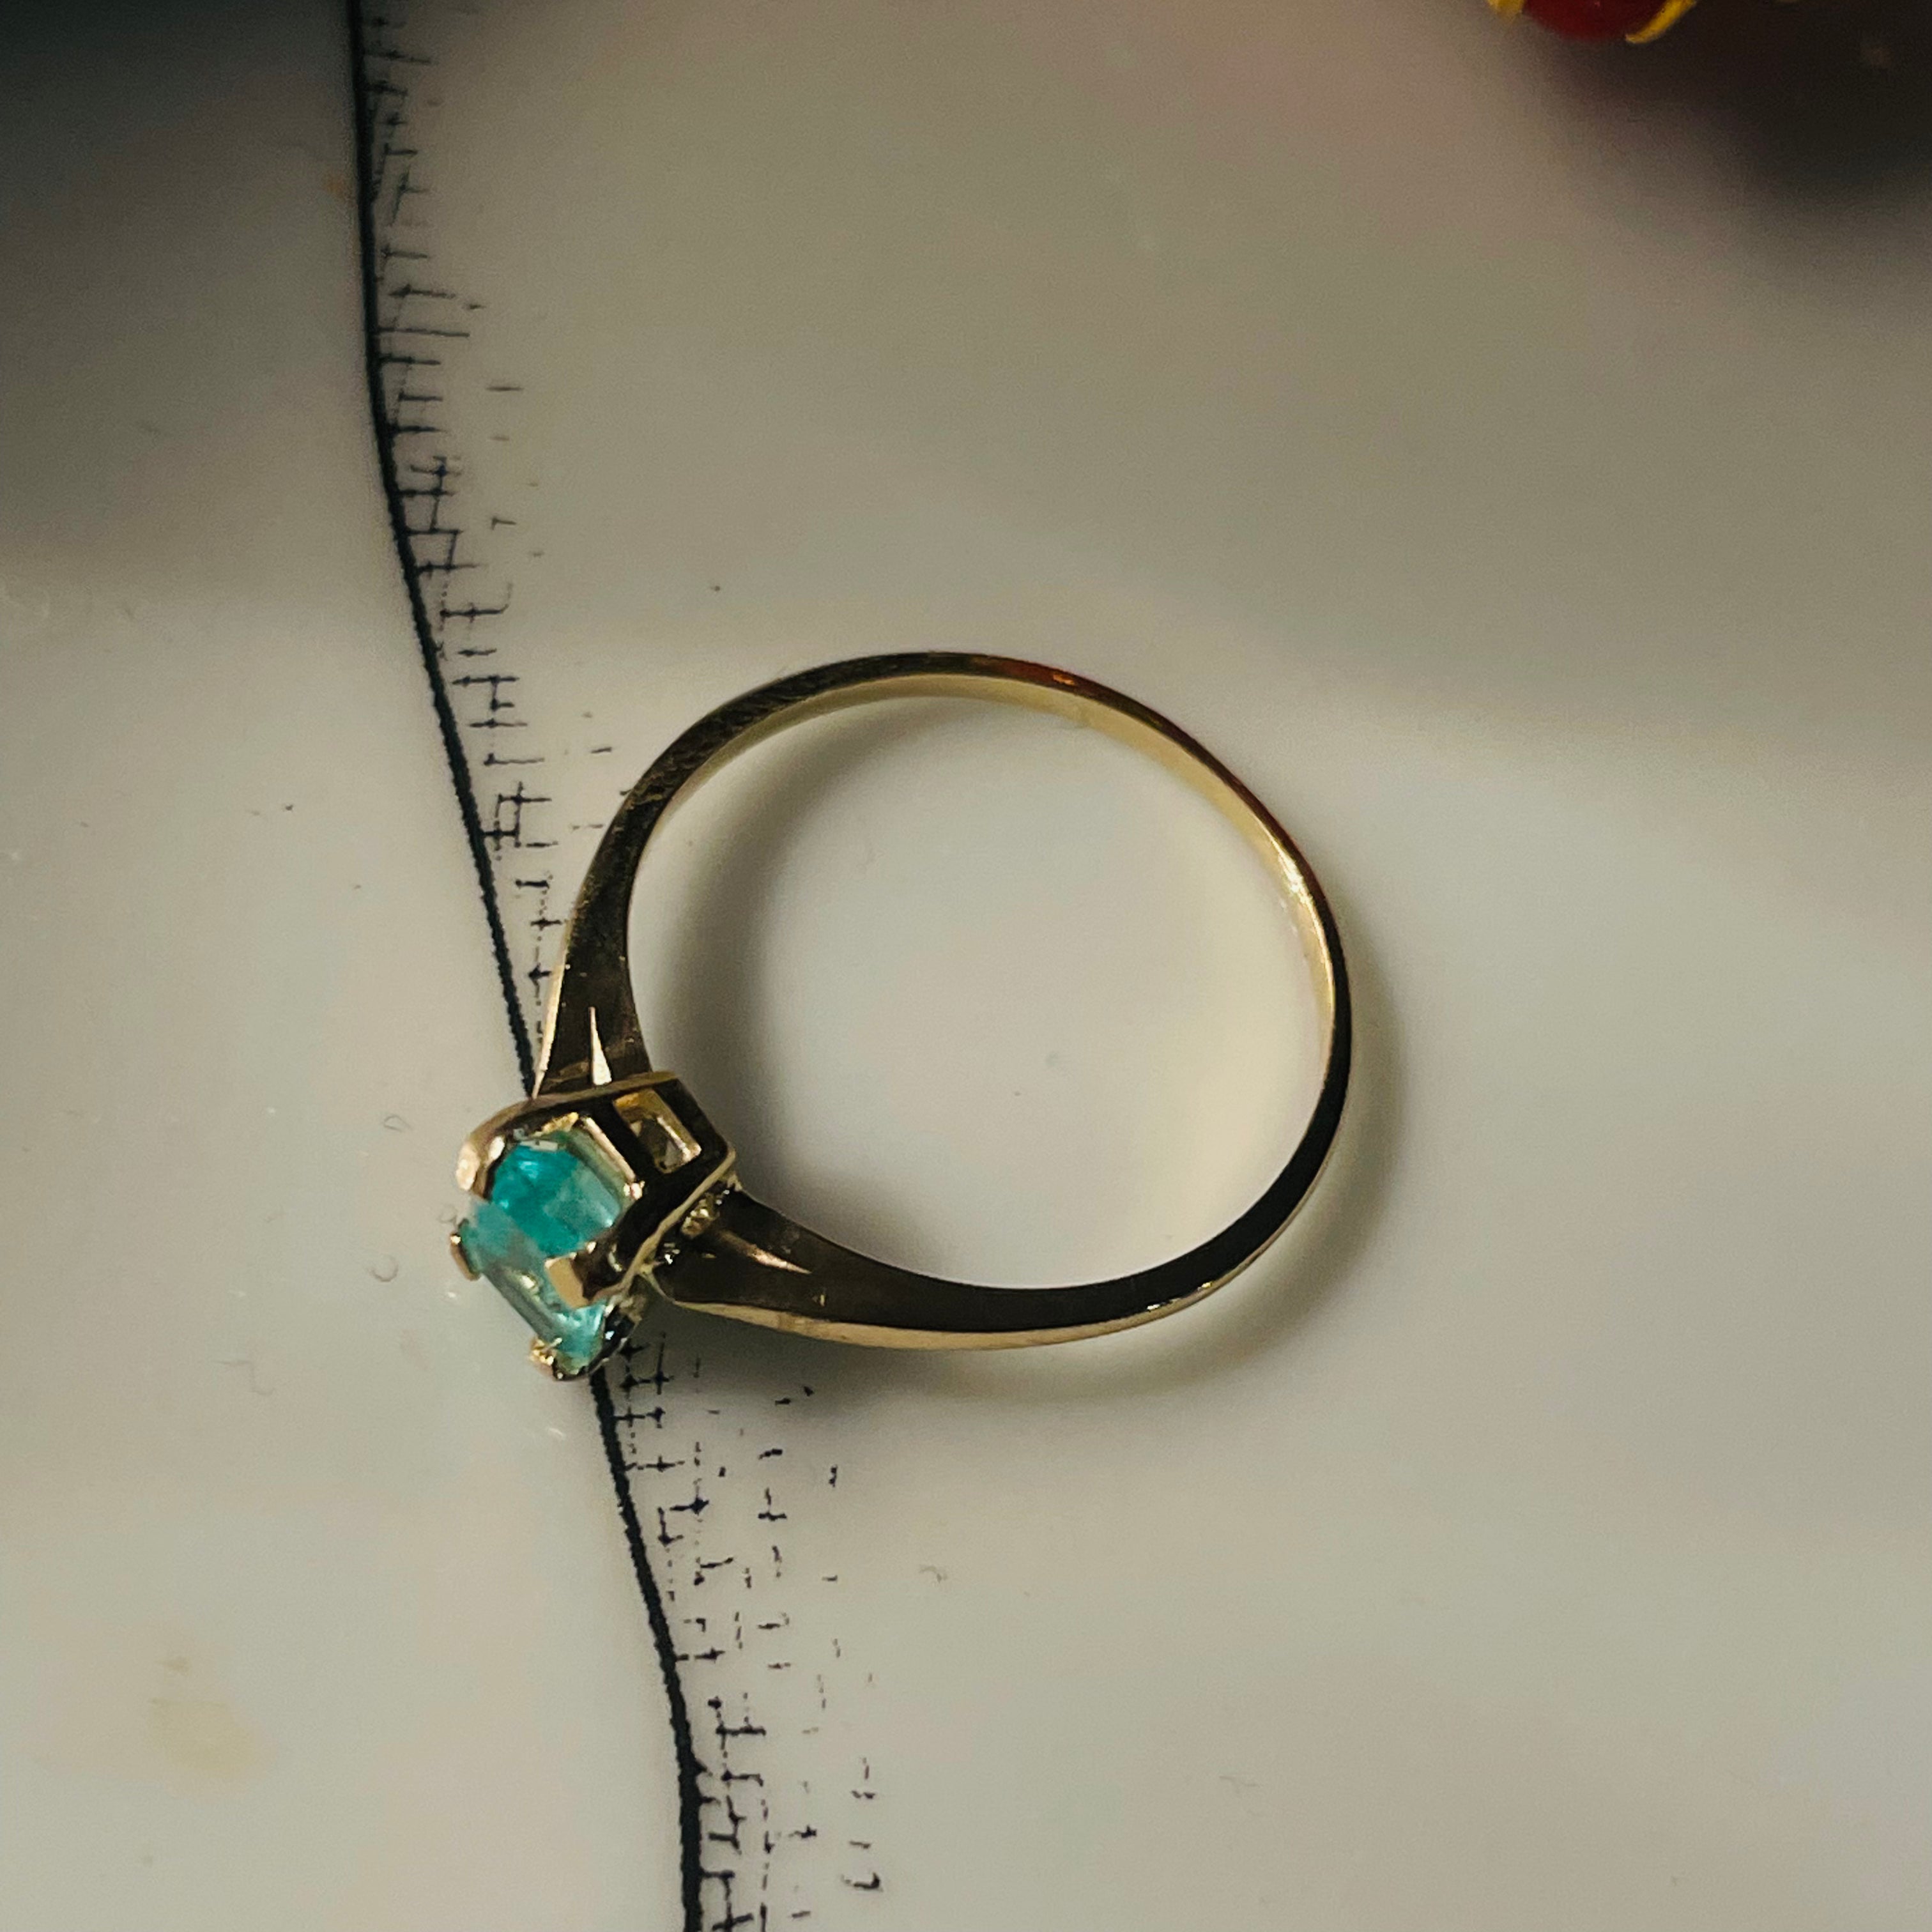 Solitaire Colombian Emerald 14K Yellow Gold Ring Size 6 RESERVED SIZED to 4